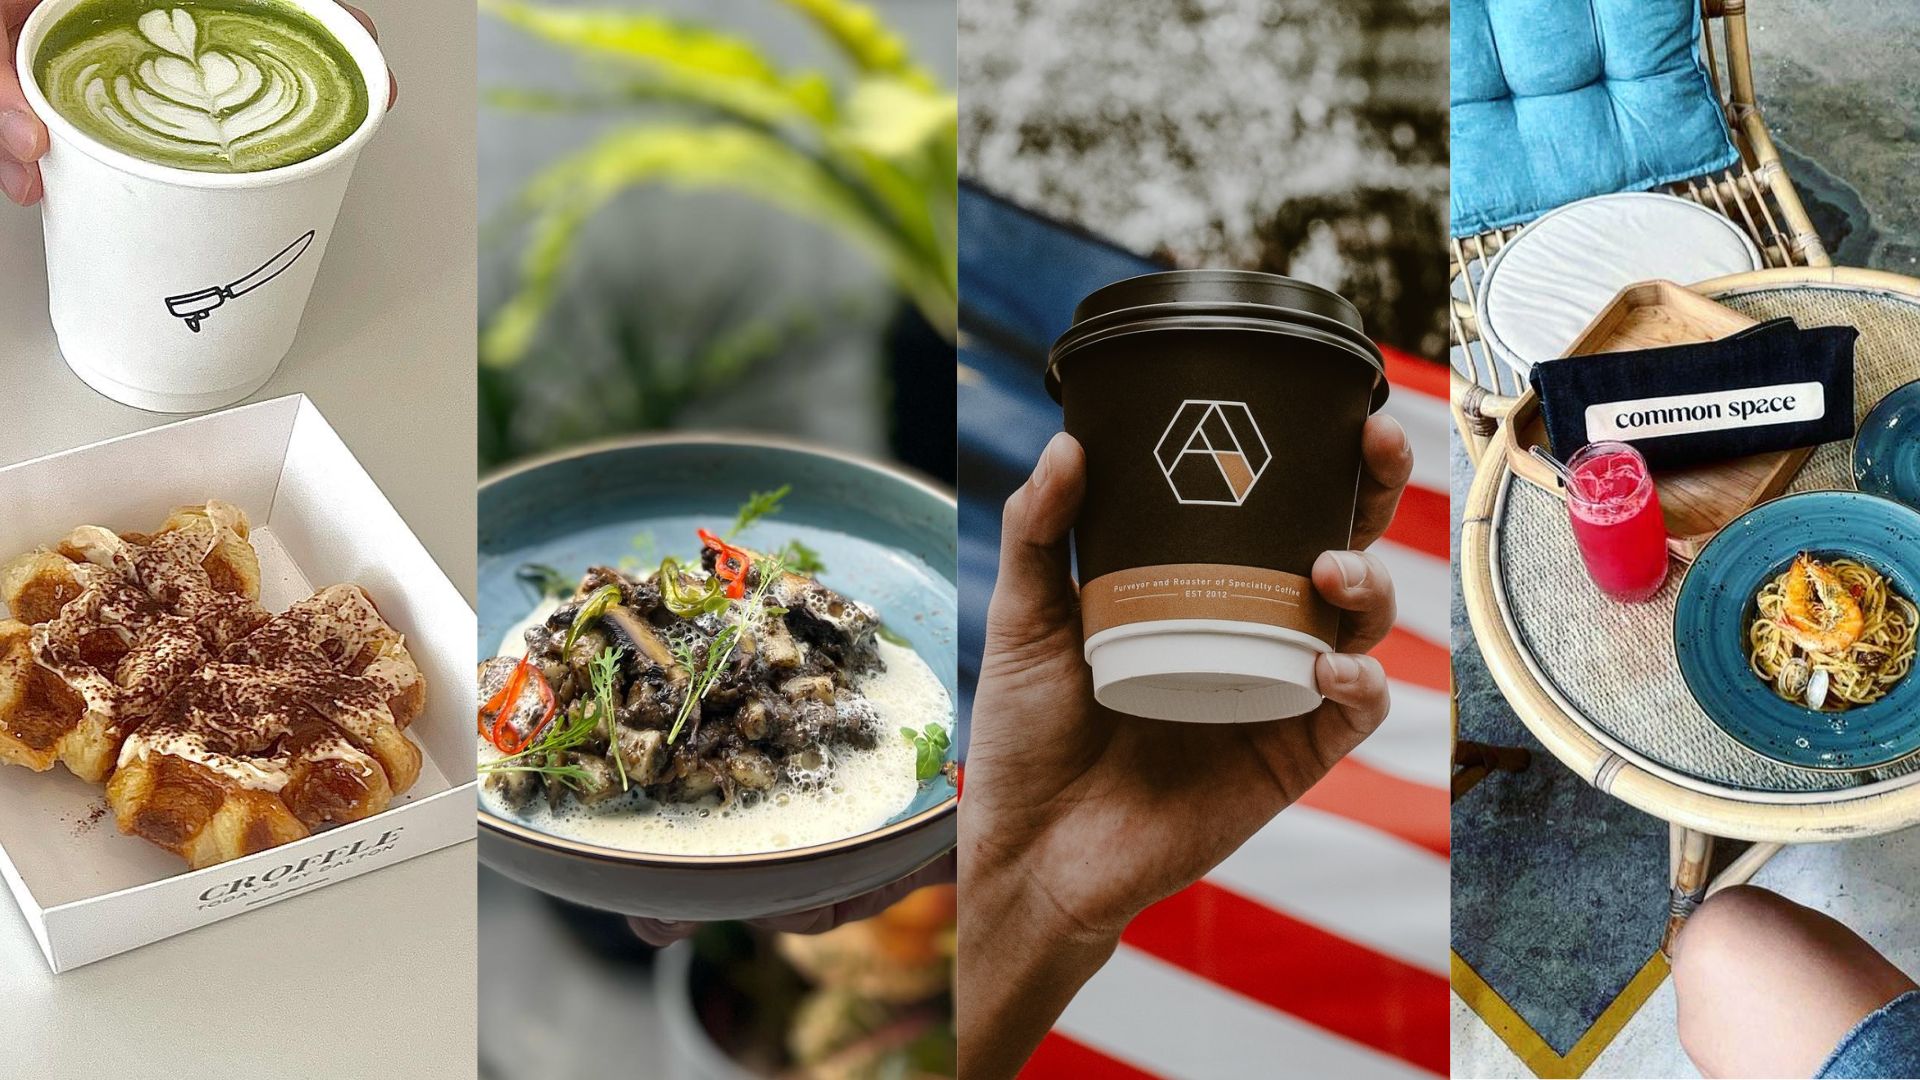 Go grab brunches at these new places where you can hang out with friends and enjoy yummy foods that will look good on your feeds!